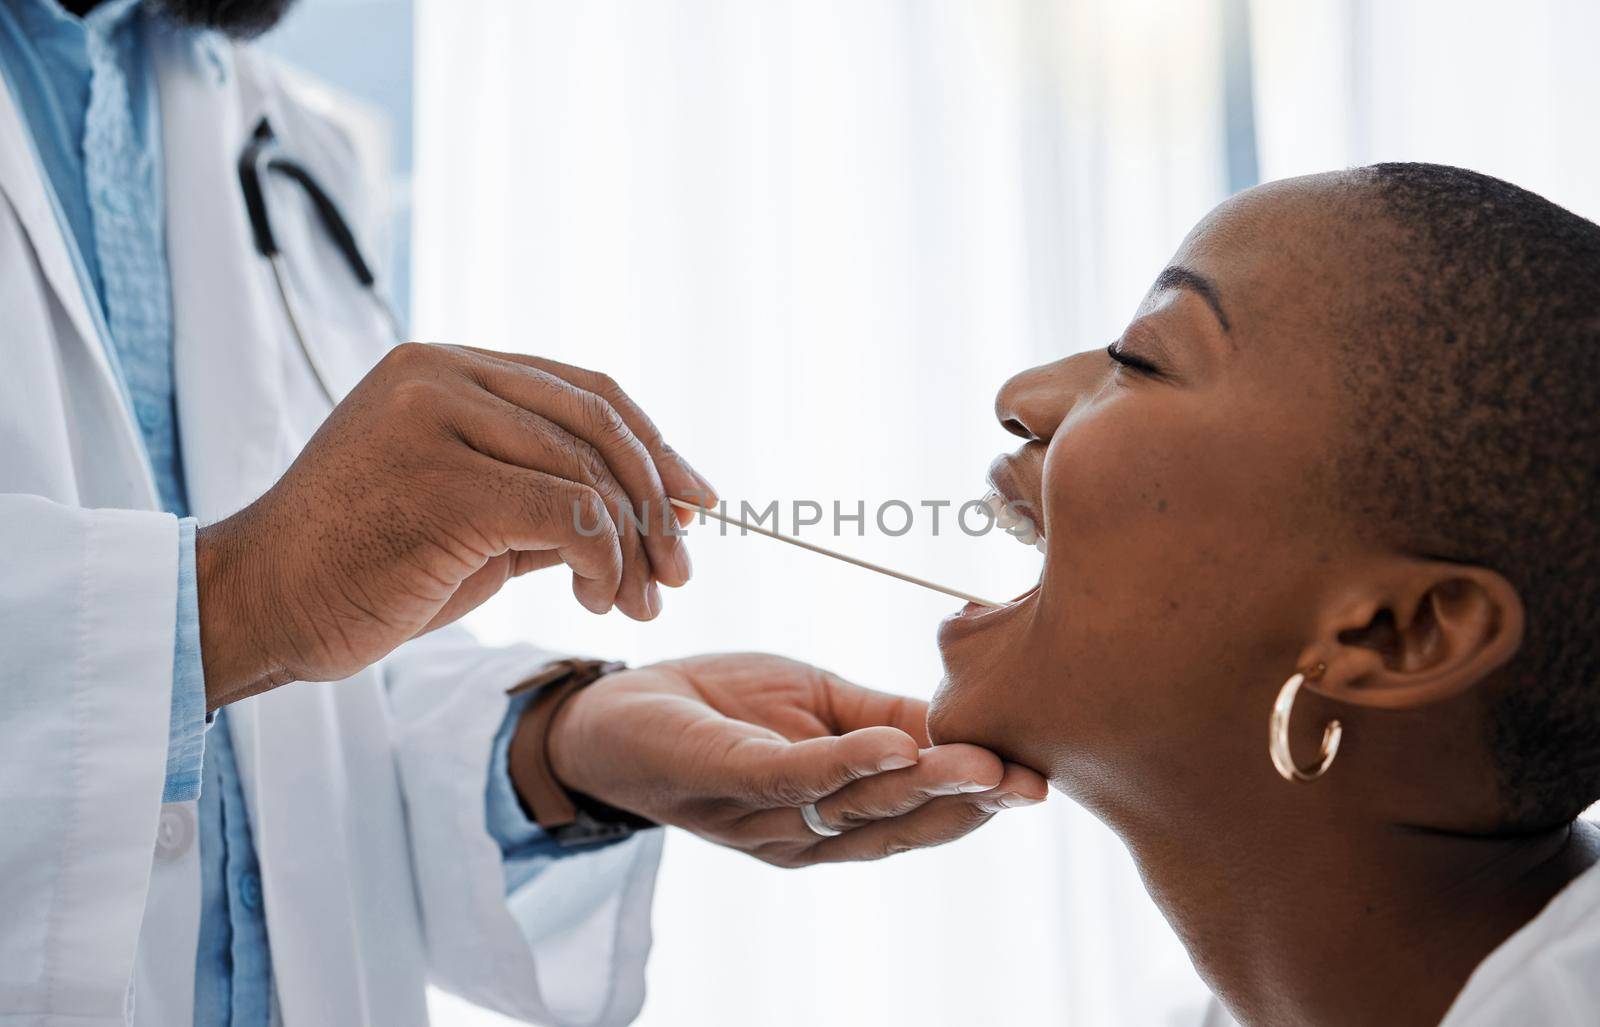 Doctor, otolaryngologist or dentist with a medical instrument checking the throat for tonsils or oral cancer. Health, healthcare worker and wellness with an ent specialist examining a black woman.